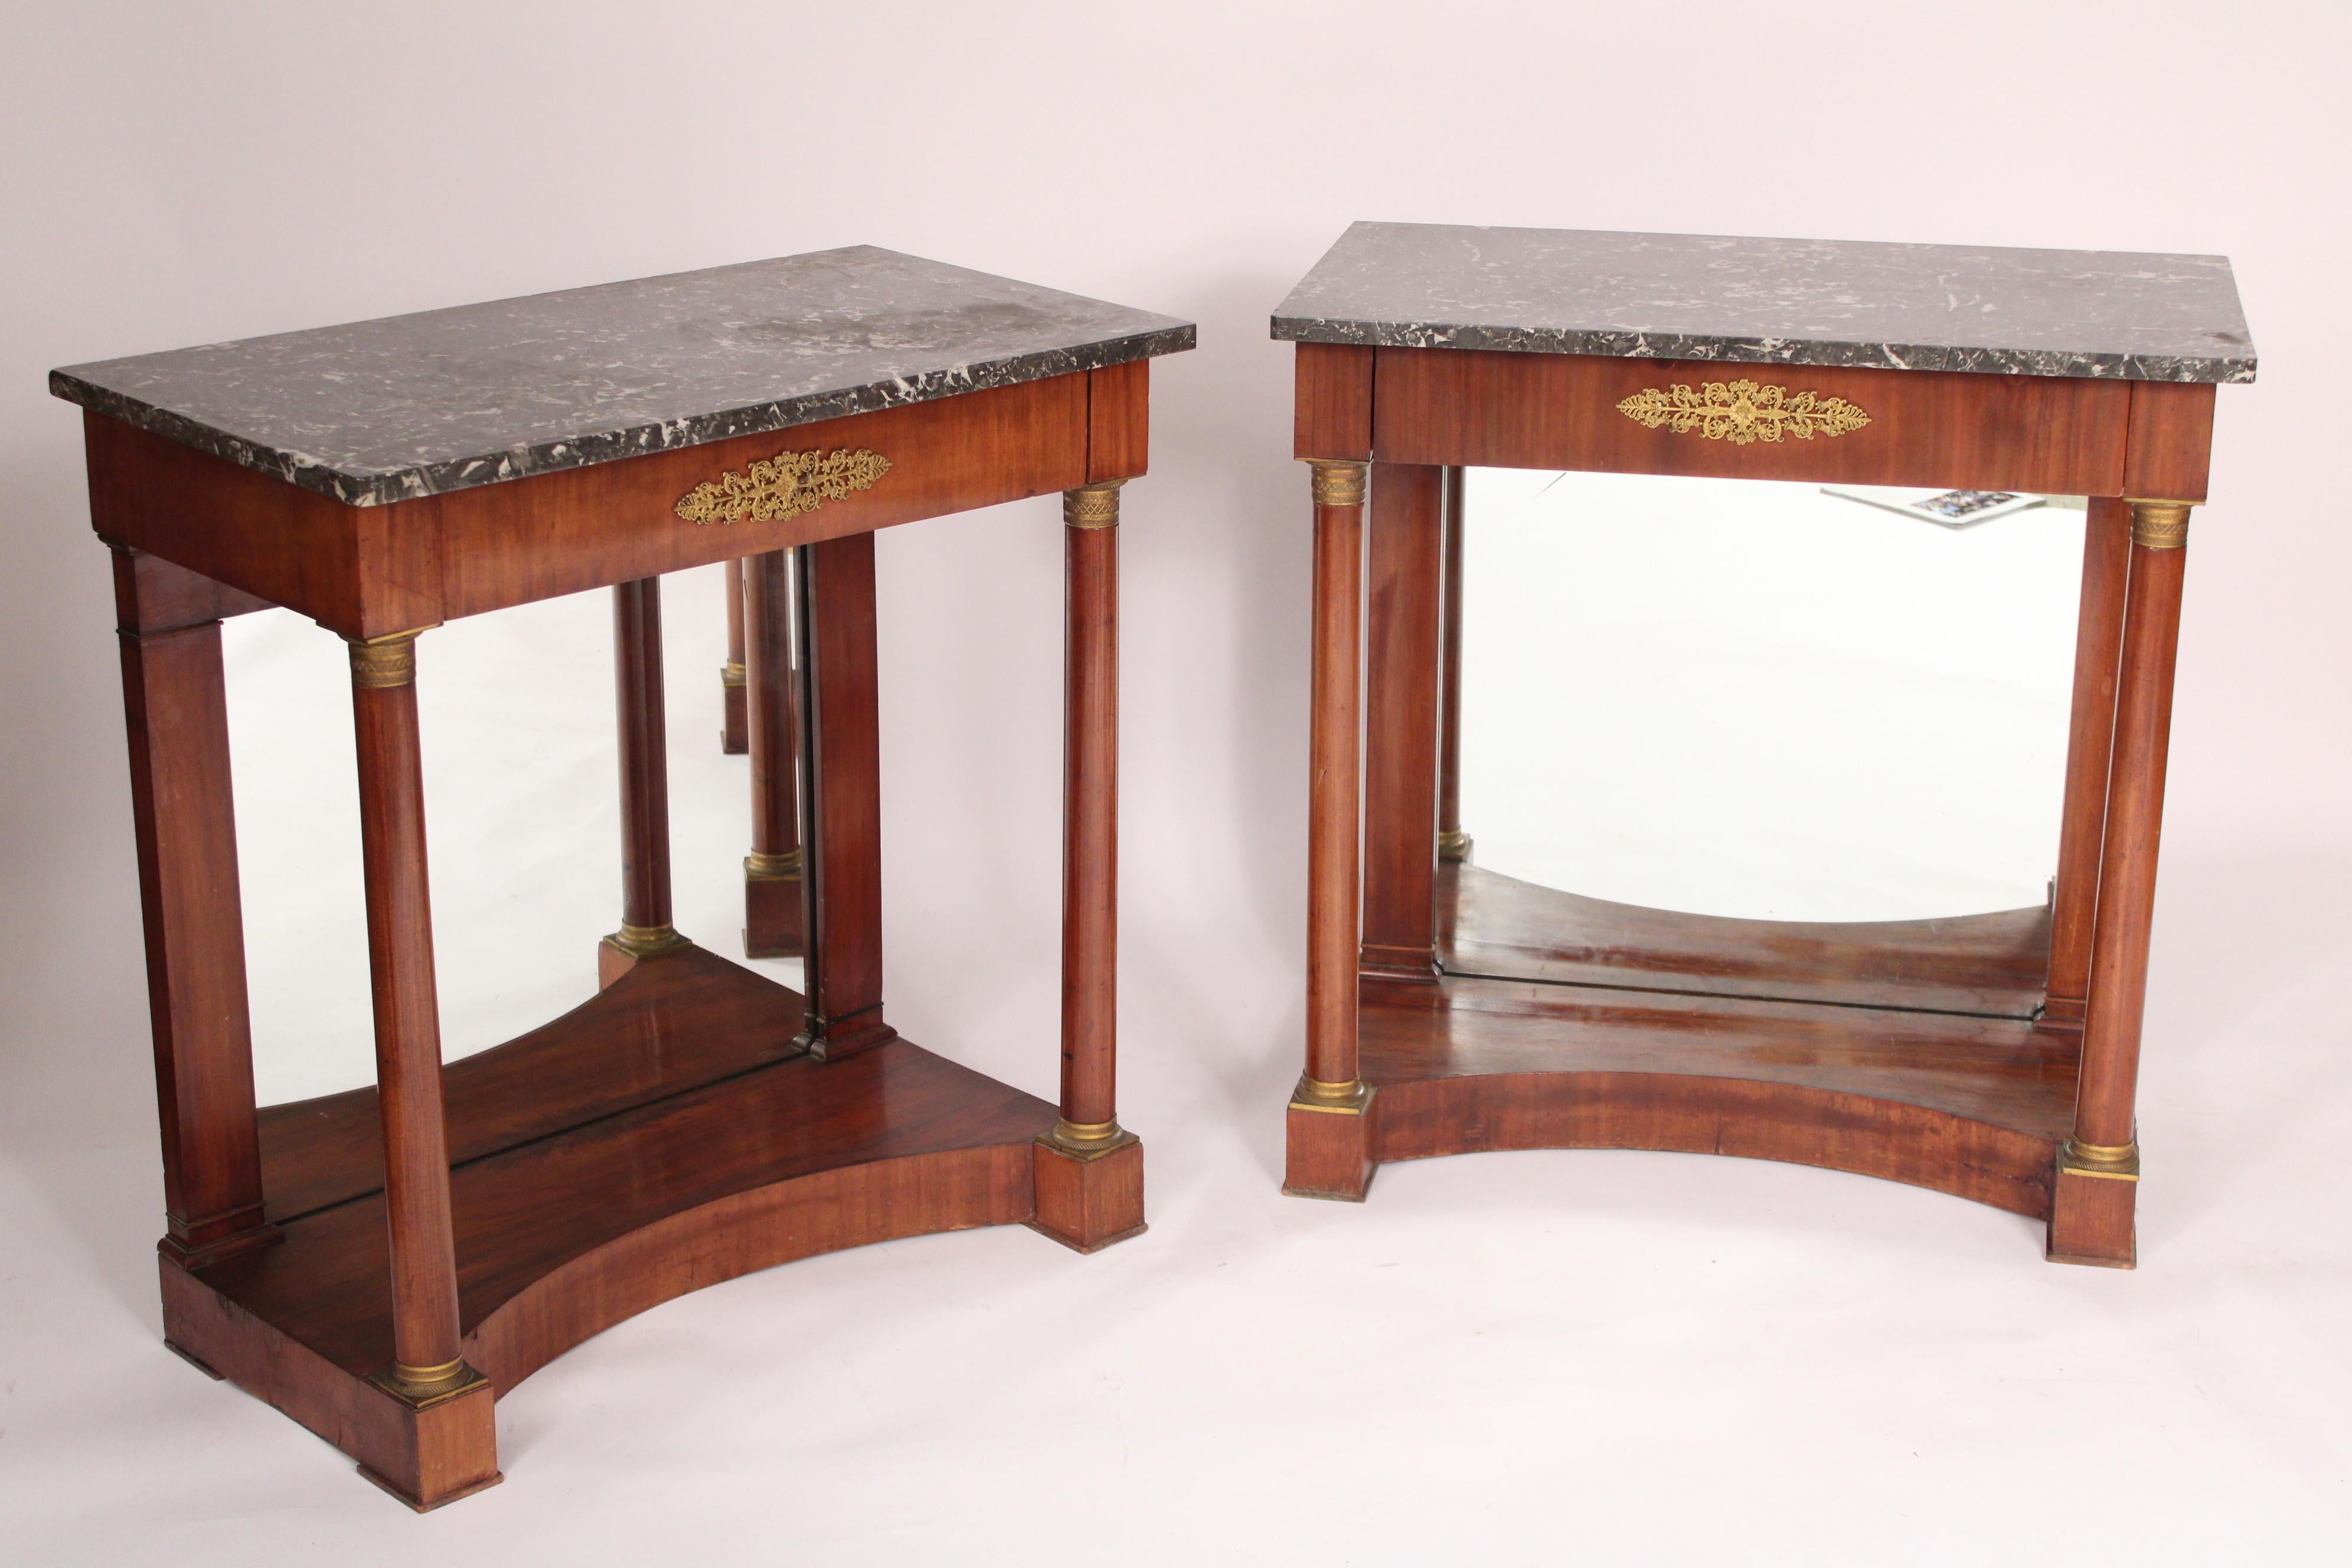 Pair of antique Empire style brass mounted mahogany console tables with marble tops, circa 1900. With grey marble tops, frieze drawer with a central classical brass mounting, two front columns with brass mountings on capitals and plinths and a